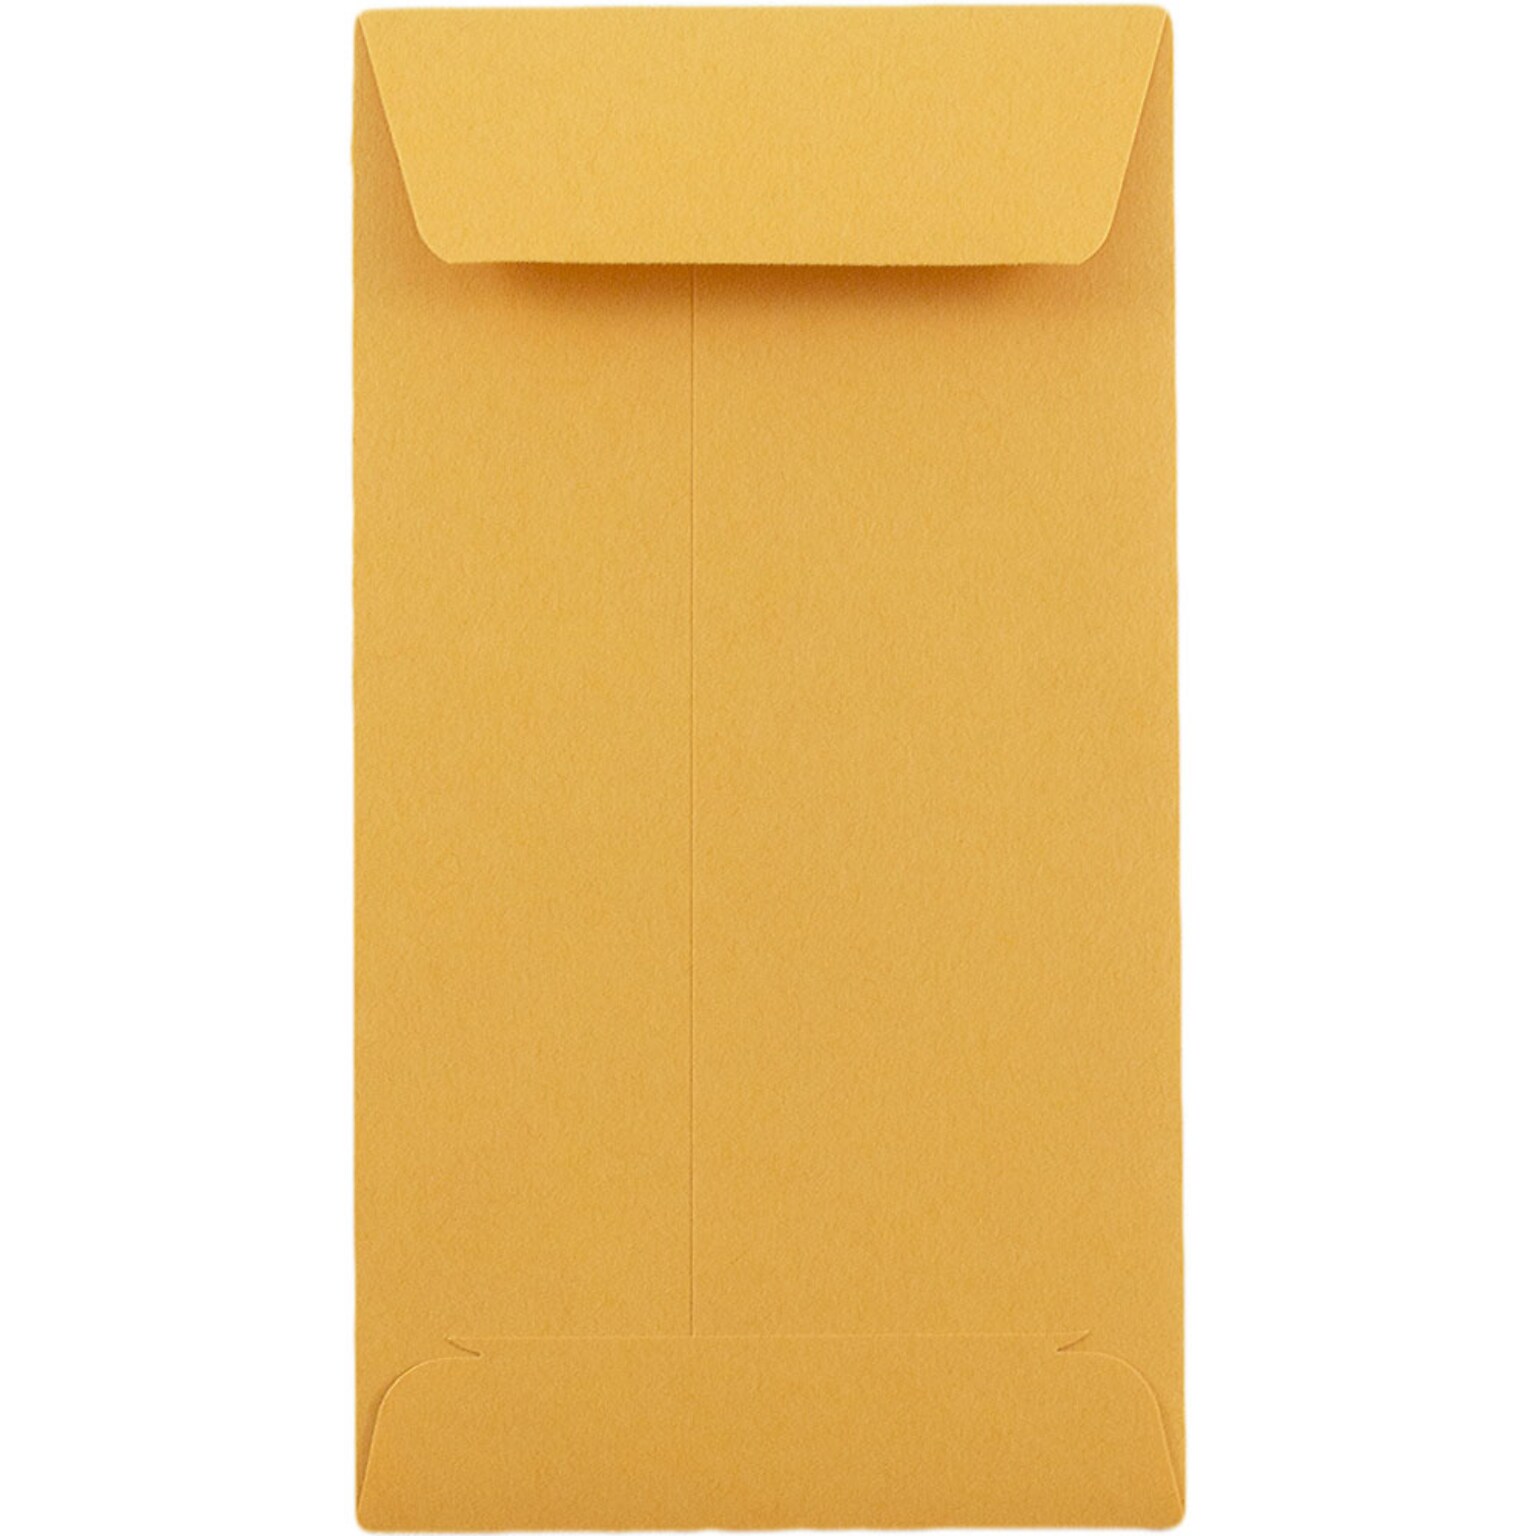 JAM PAPER #5.5 Coin Recycled Business Envelopes, 3 1/8 x 5 1/2, Brown Kraft Recycled, 100/Pack (40931170B)